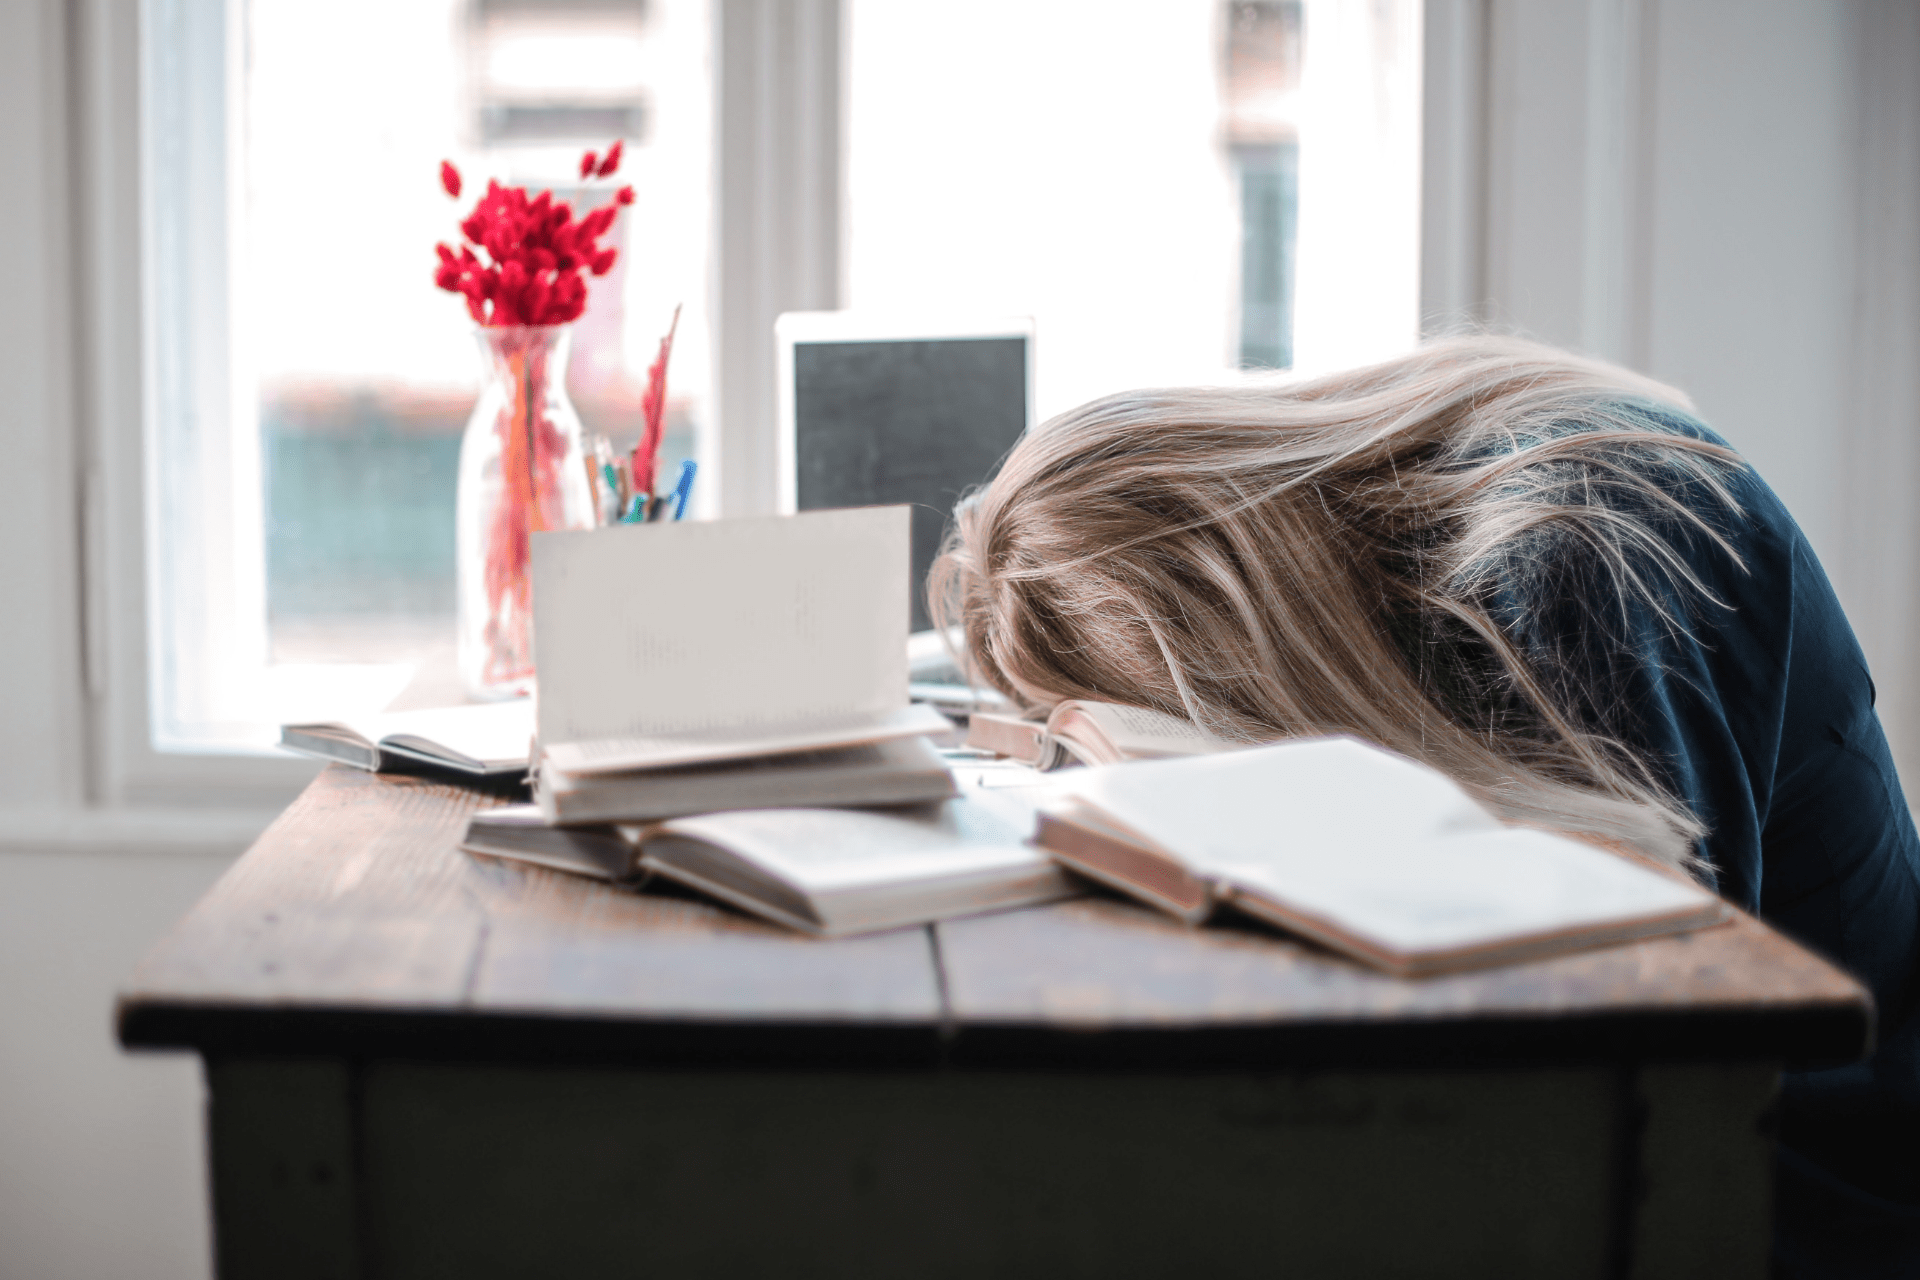 Long-haired blond student asleep with head on desk covered in books and laptop